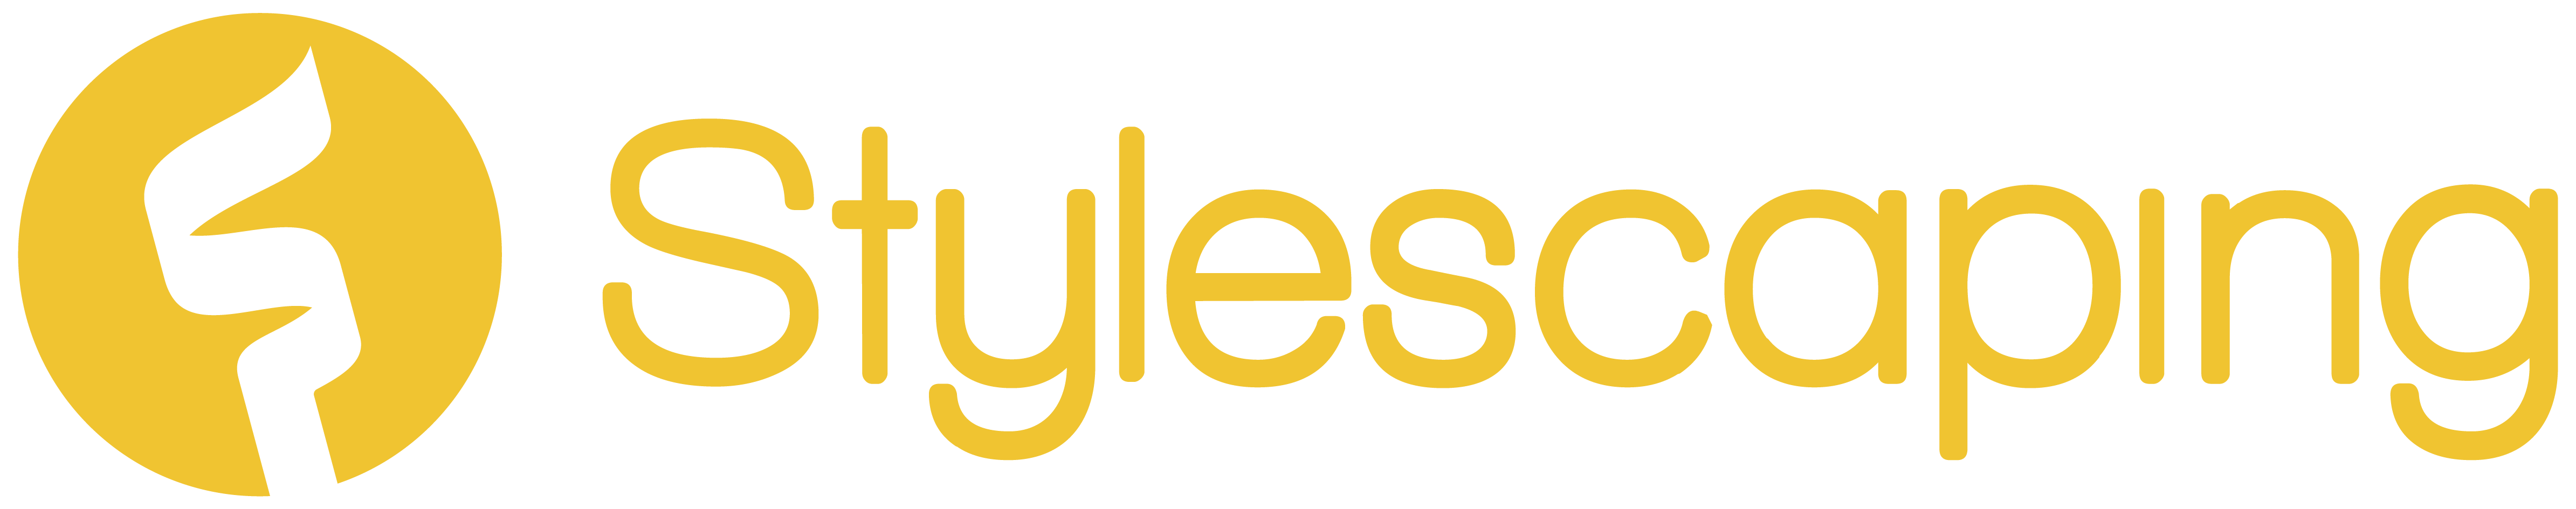 Stylescaping Logo